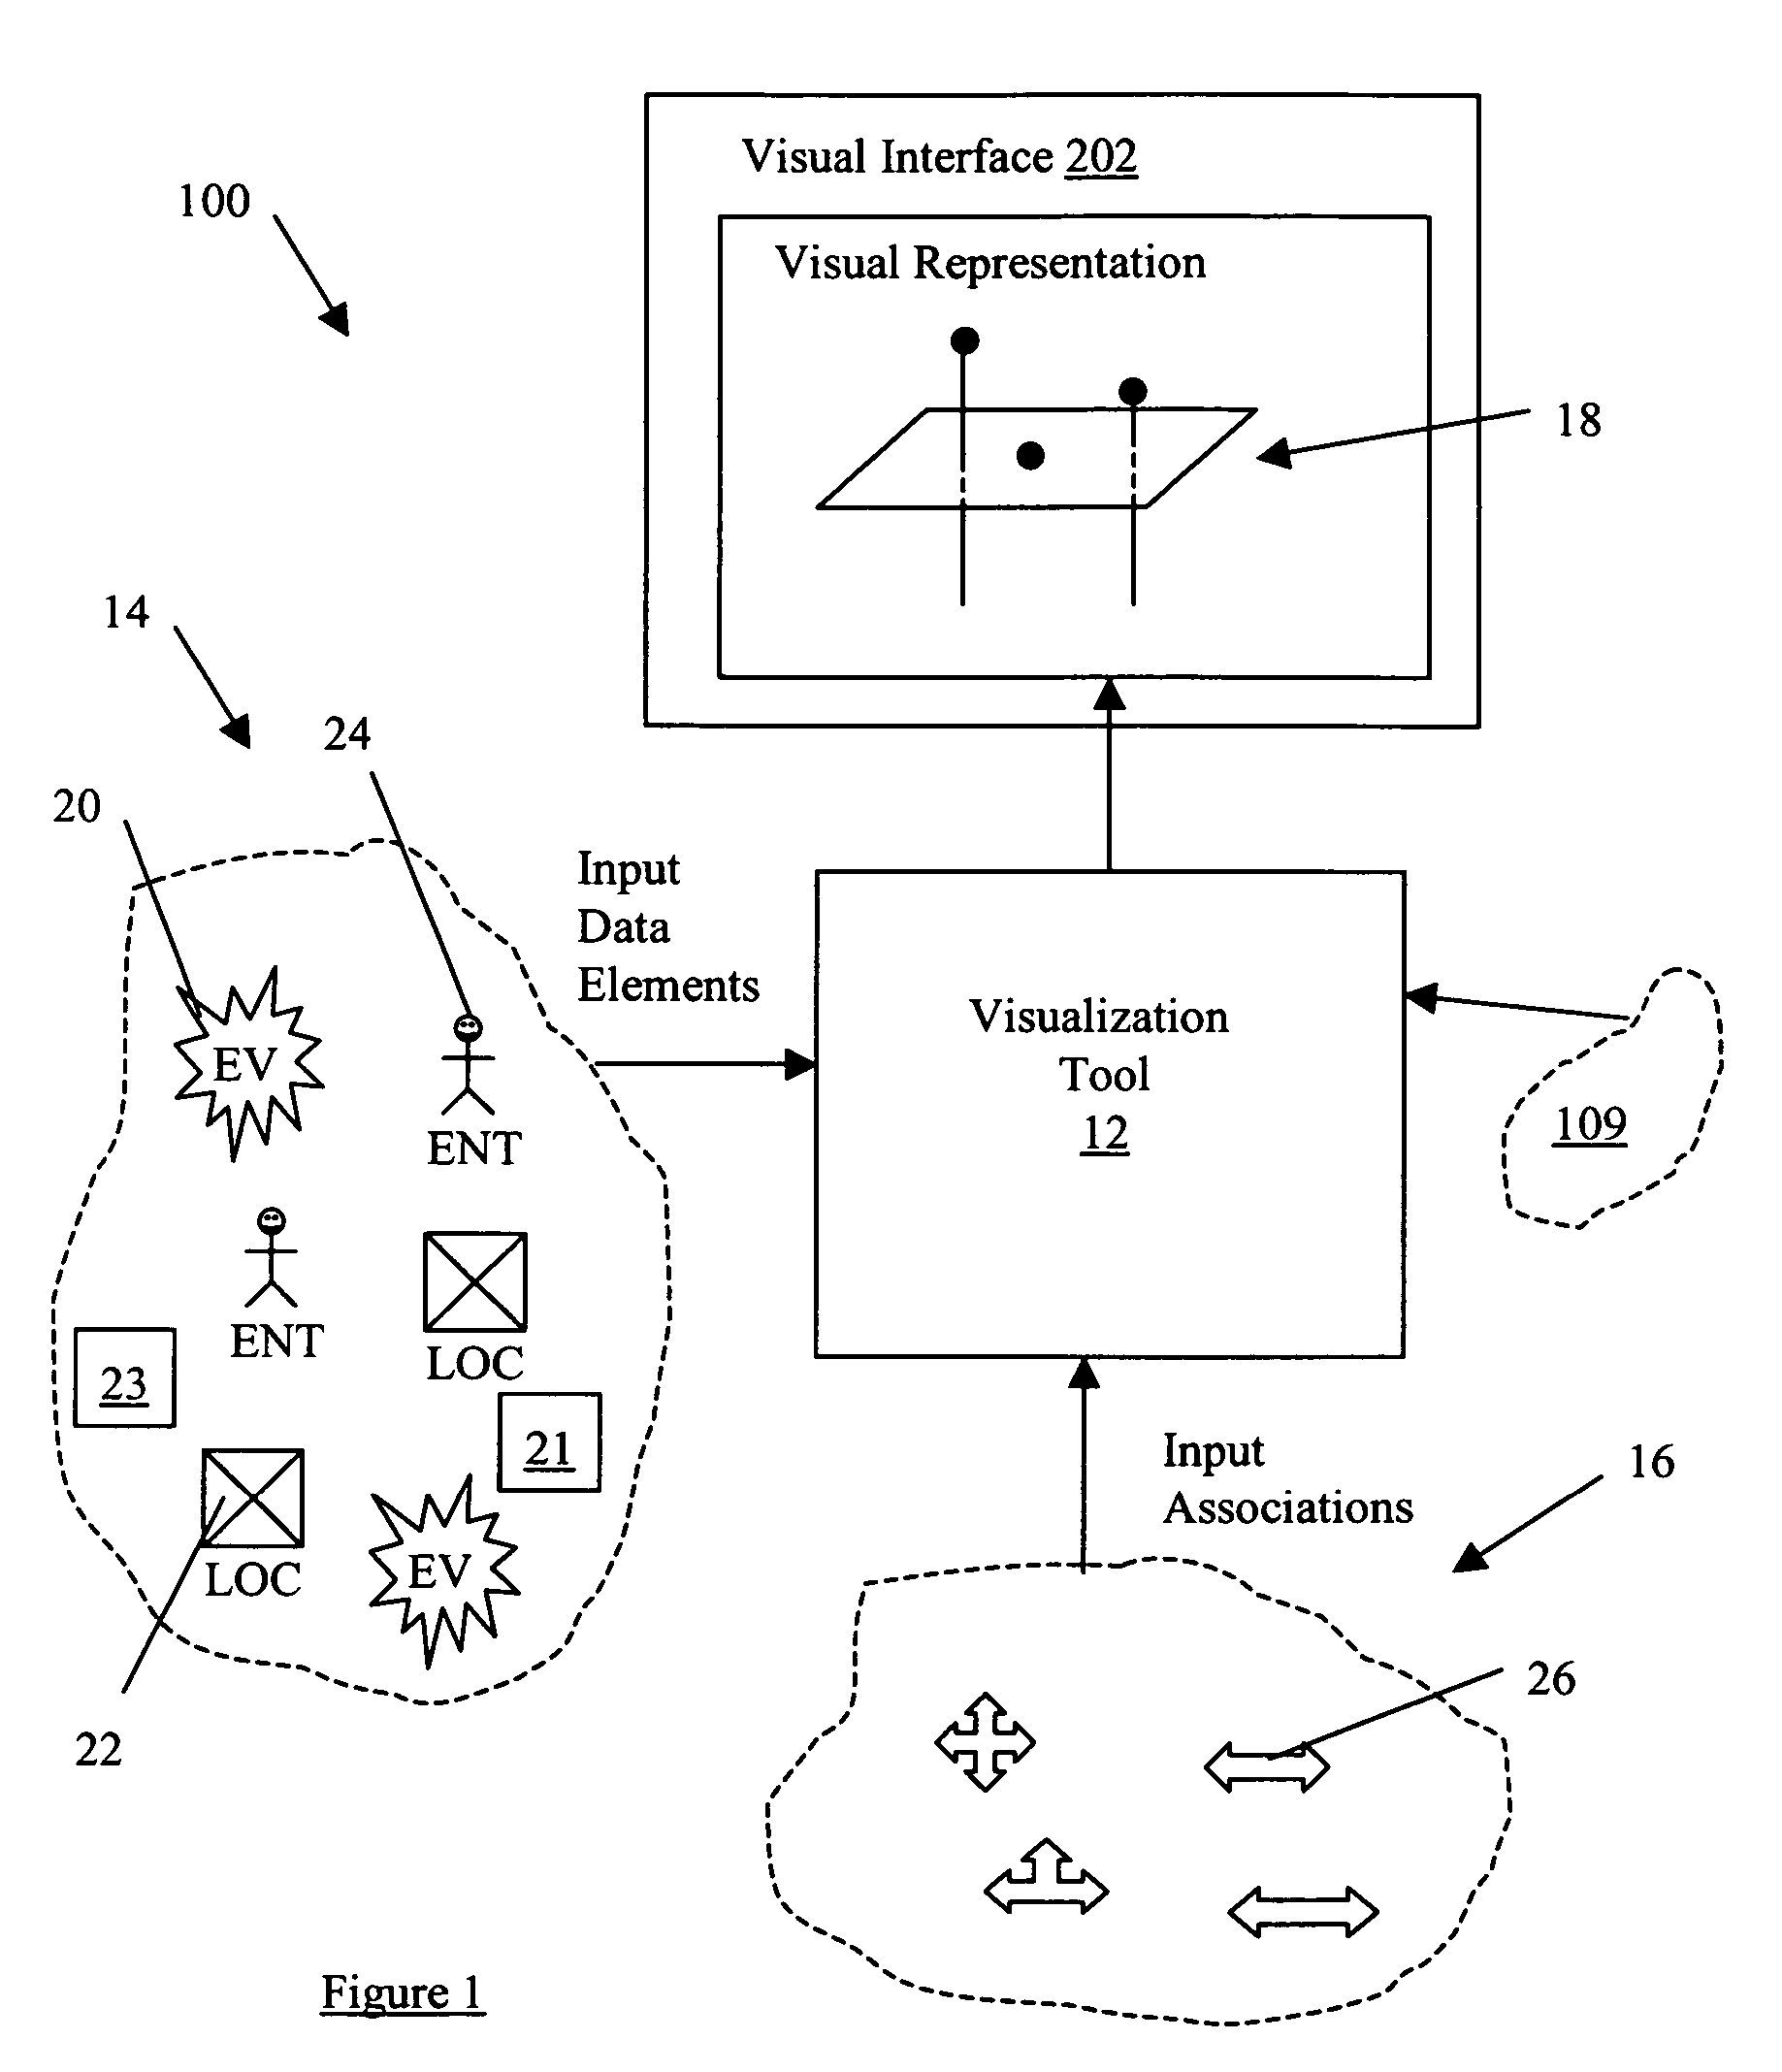 System and method for applying link analysis tools for visualizing connected temporal and spatial information on a user interface